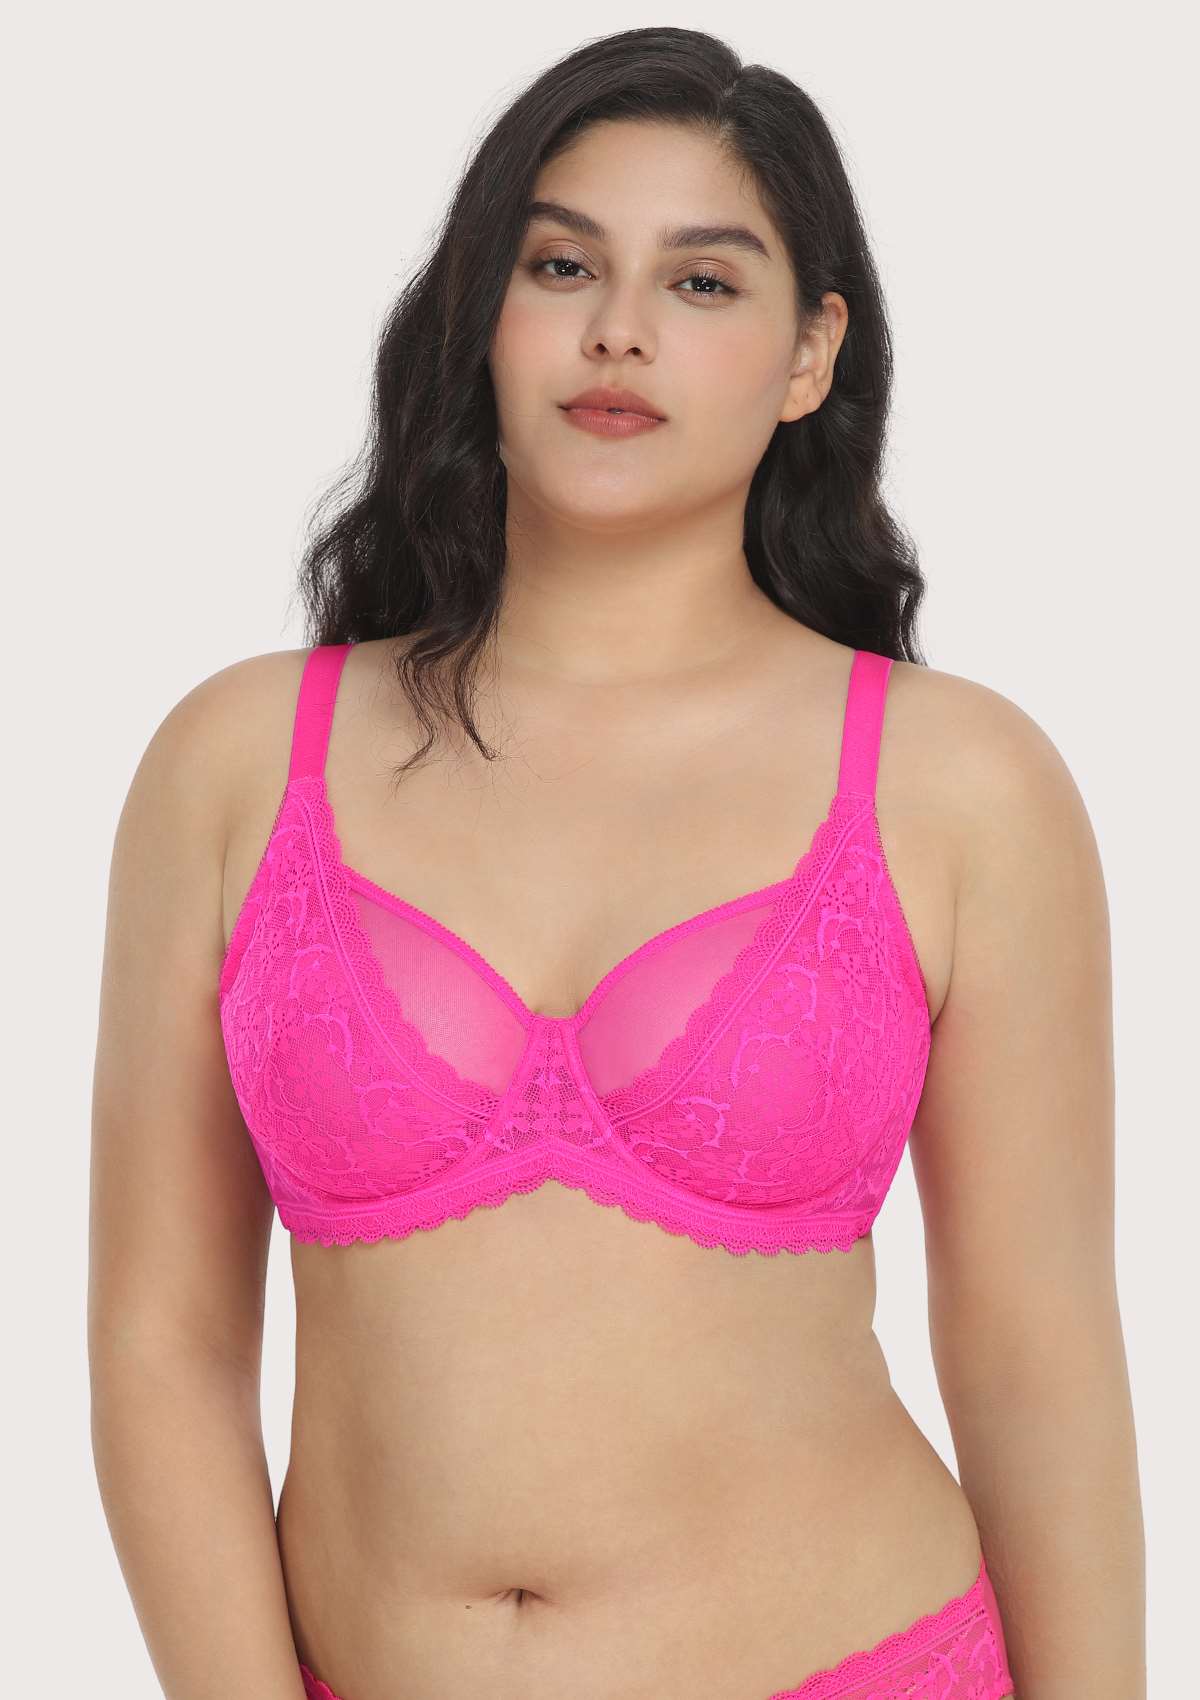 HSIA Anemone Lace Unlined Bra: Supportive, Lightweight Bra - Champagne / 38 / D